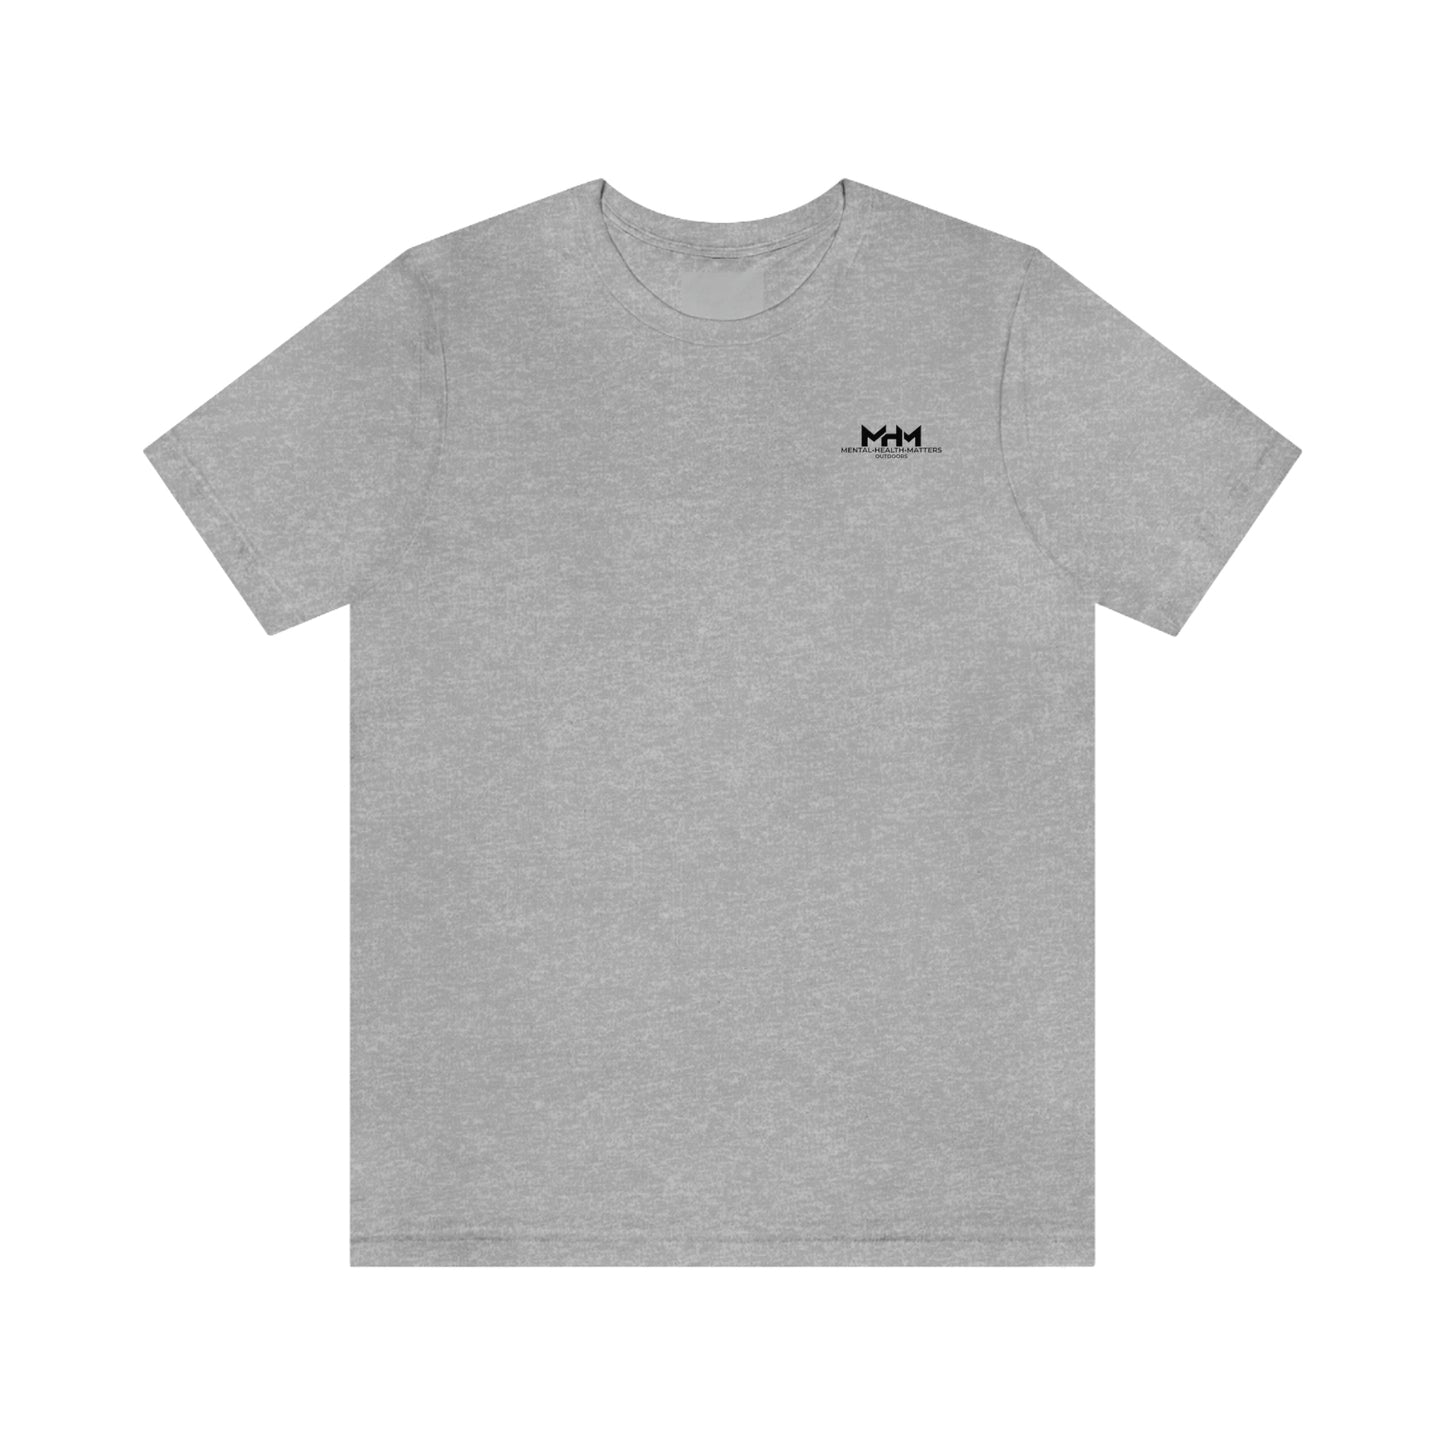 One More Bend T-Shirt (3 Colors Available)